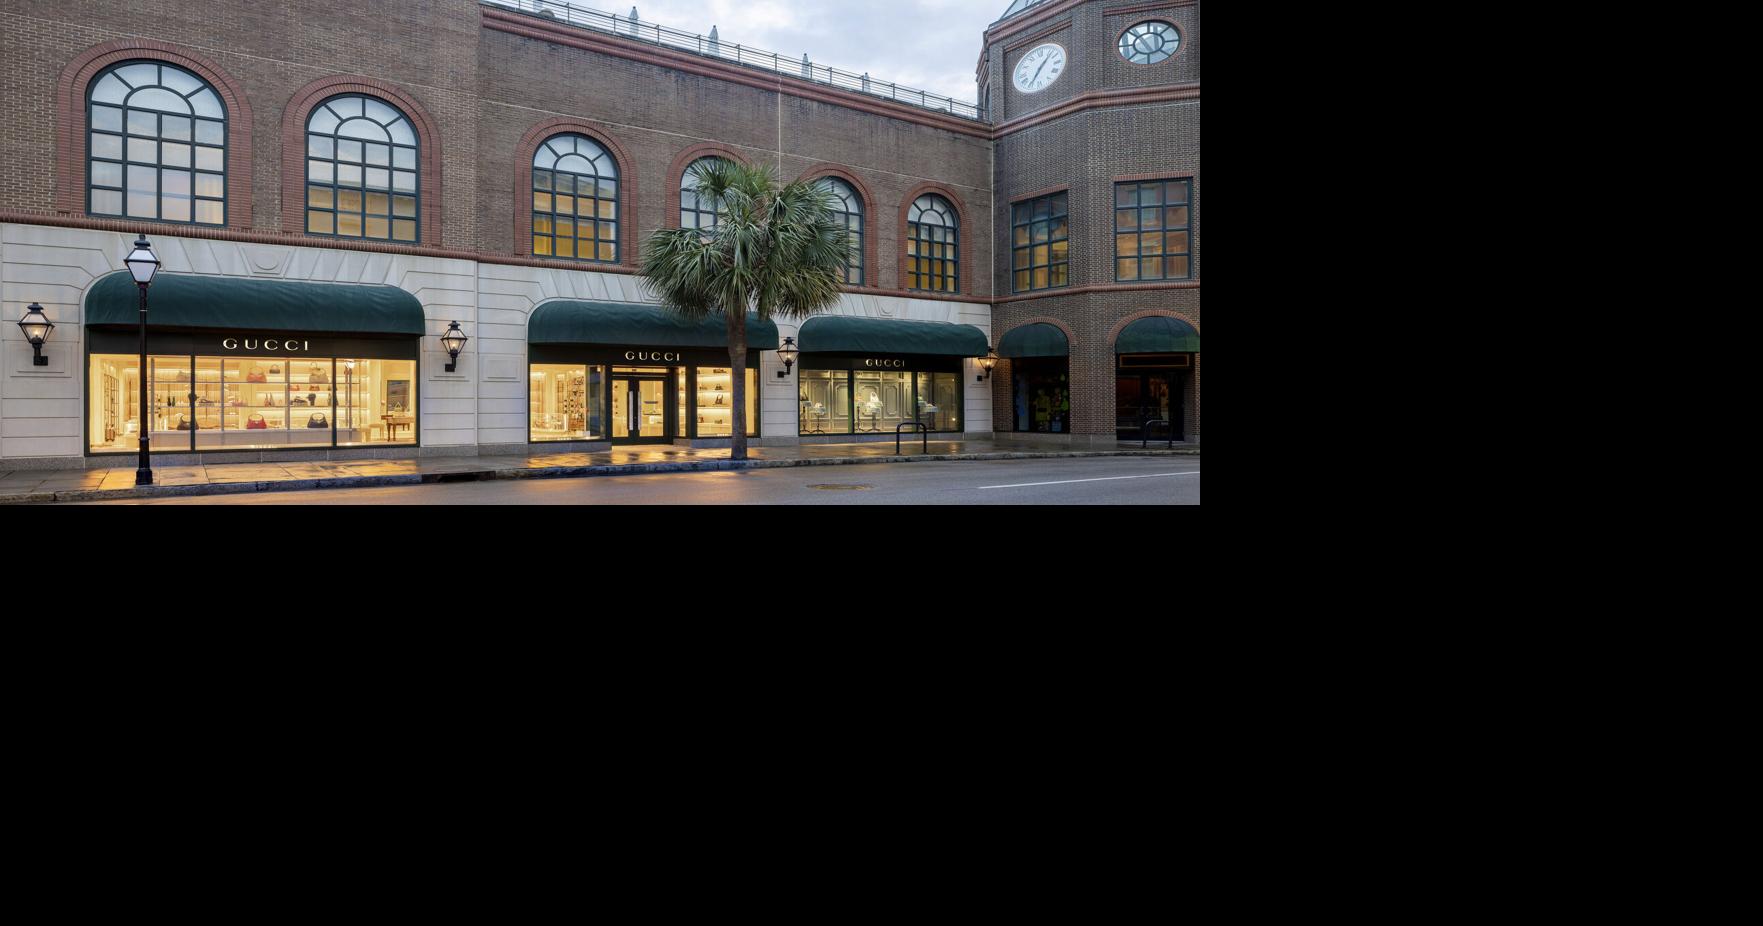 Luxury retailer Gucci opens in new location in downtown Charleston